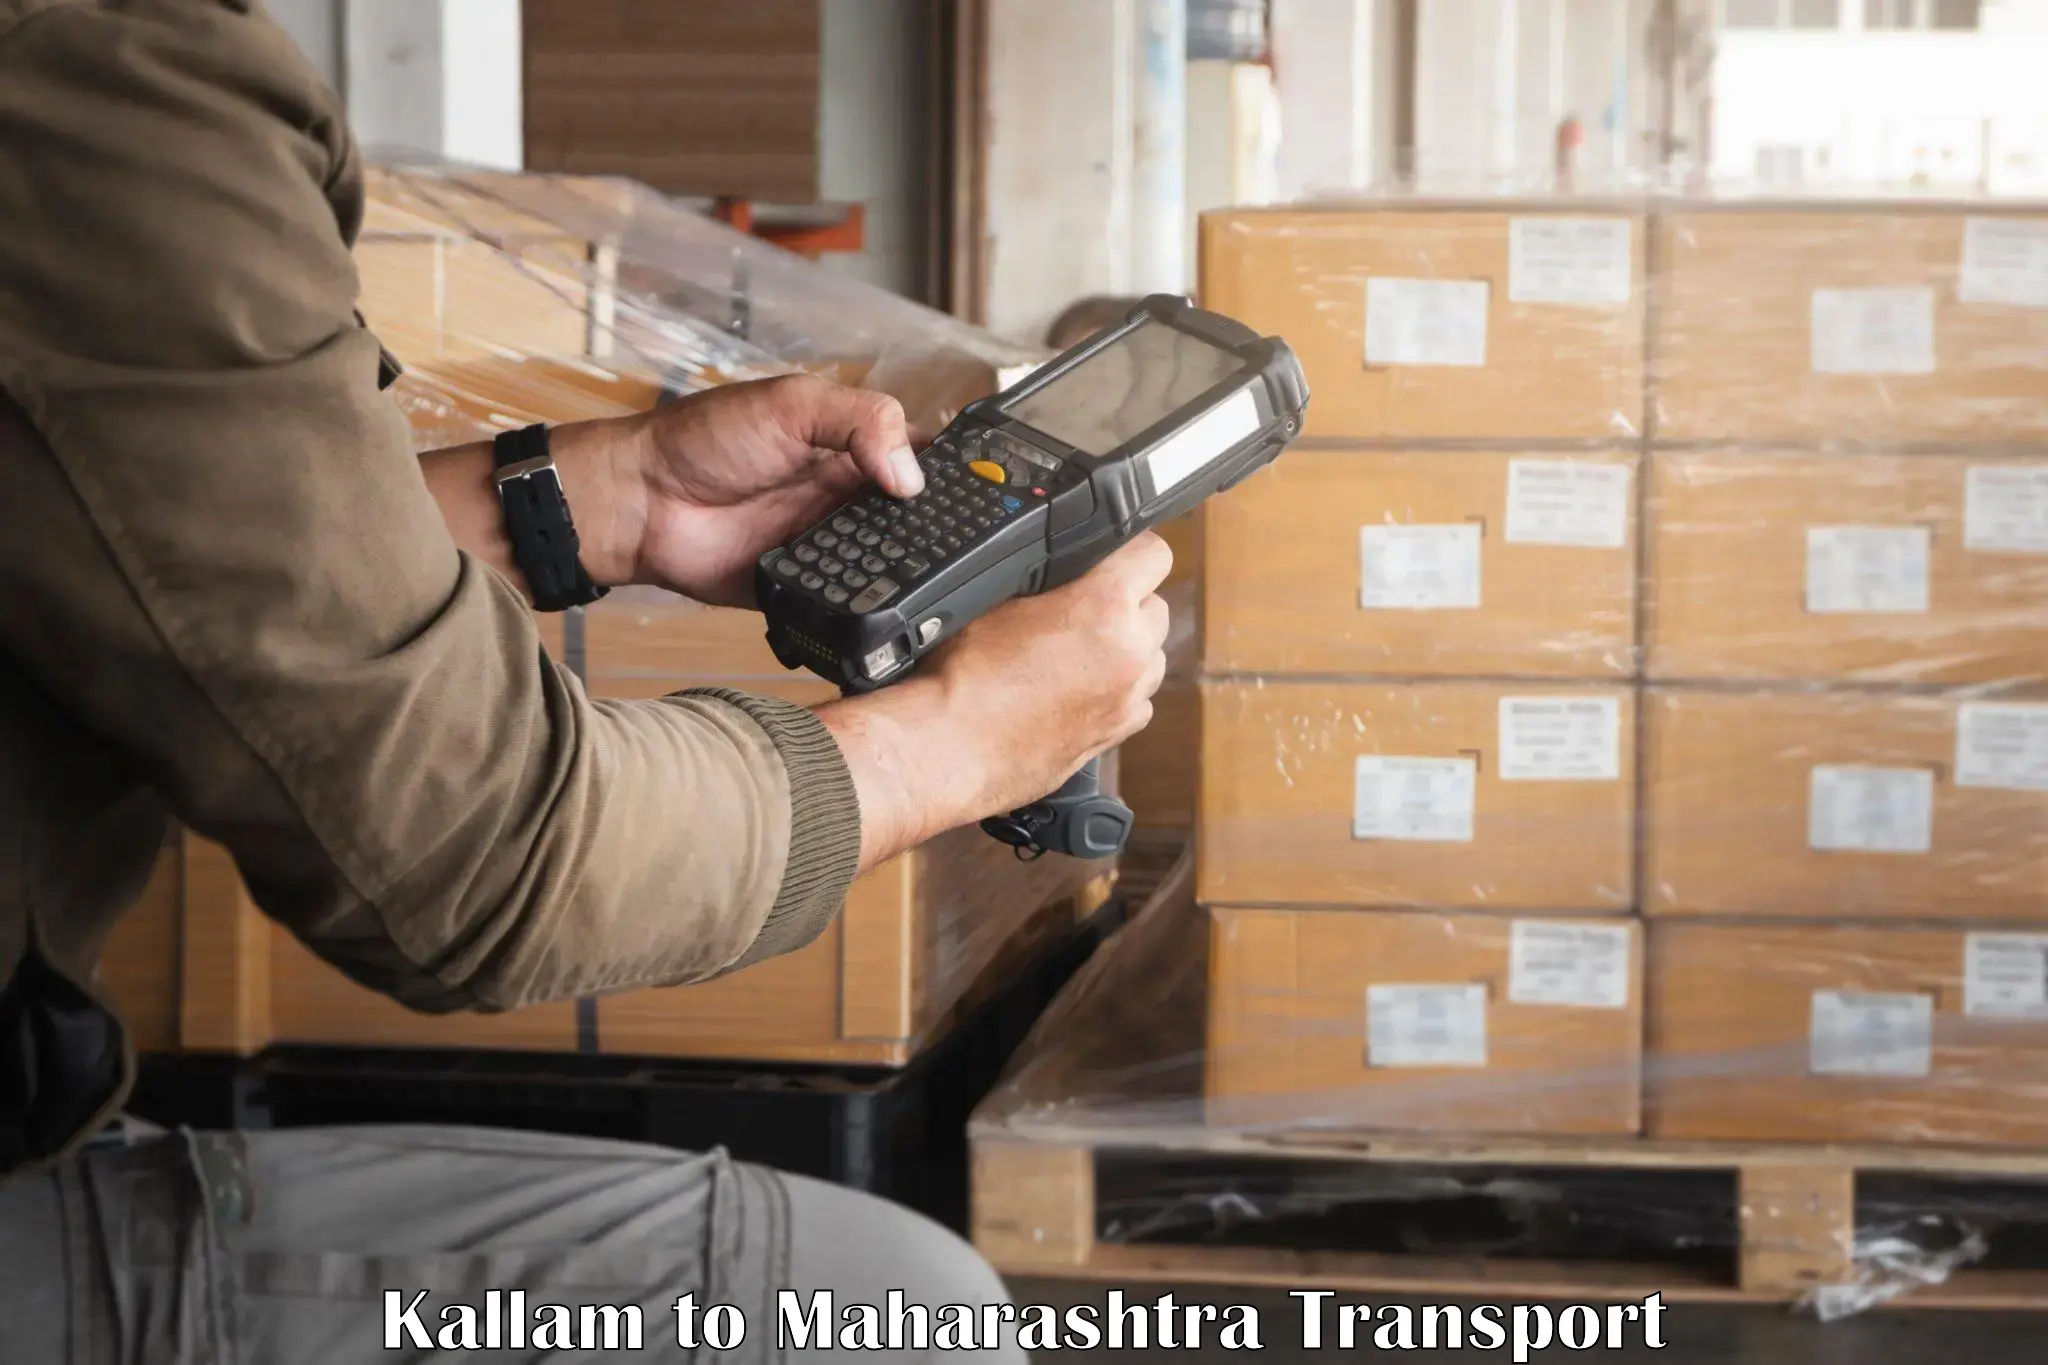 Goods delivery service Kallam to Pune